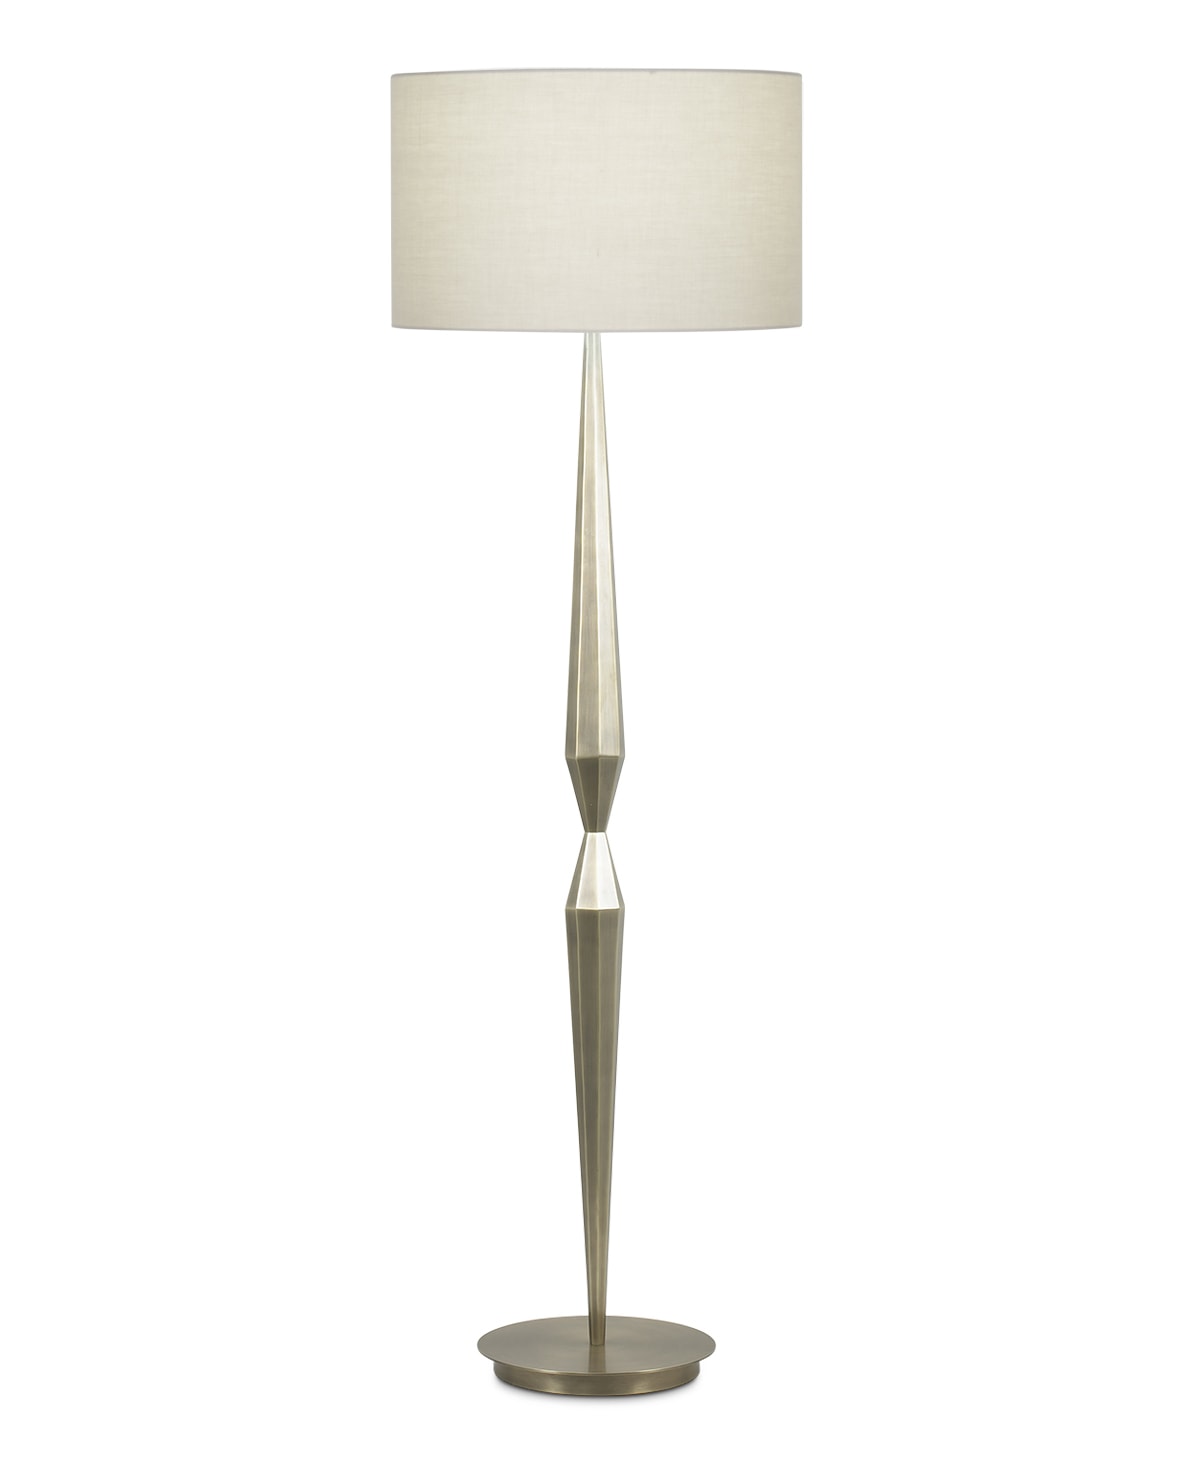 FlowDecor Martin Floor Lamp in metal with antique brass finish and beige cotton drum shade (# 3828)